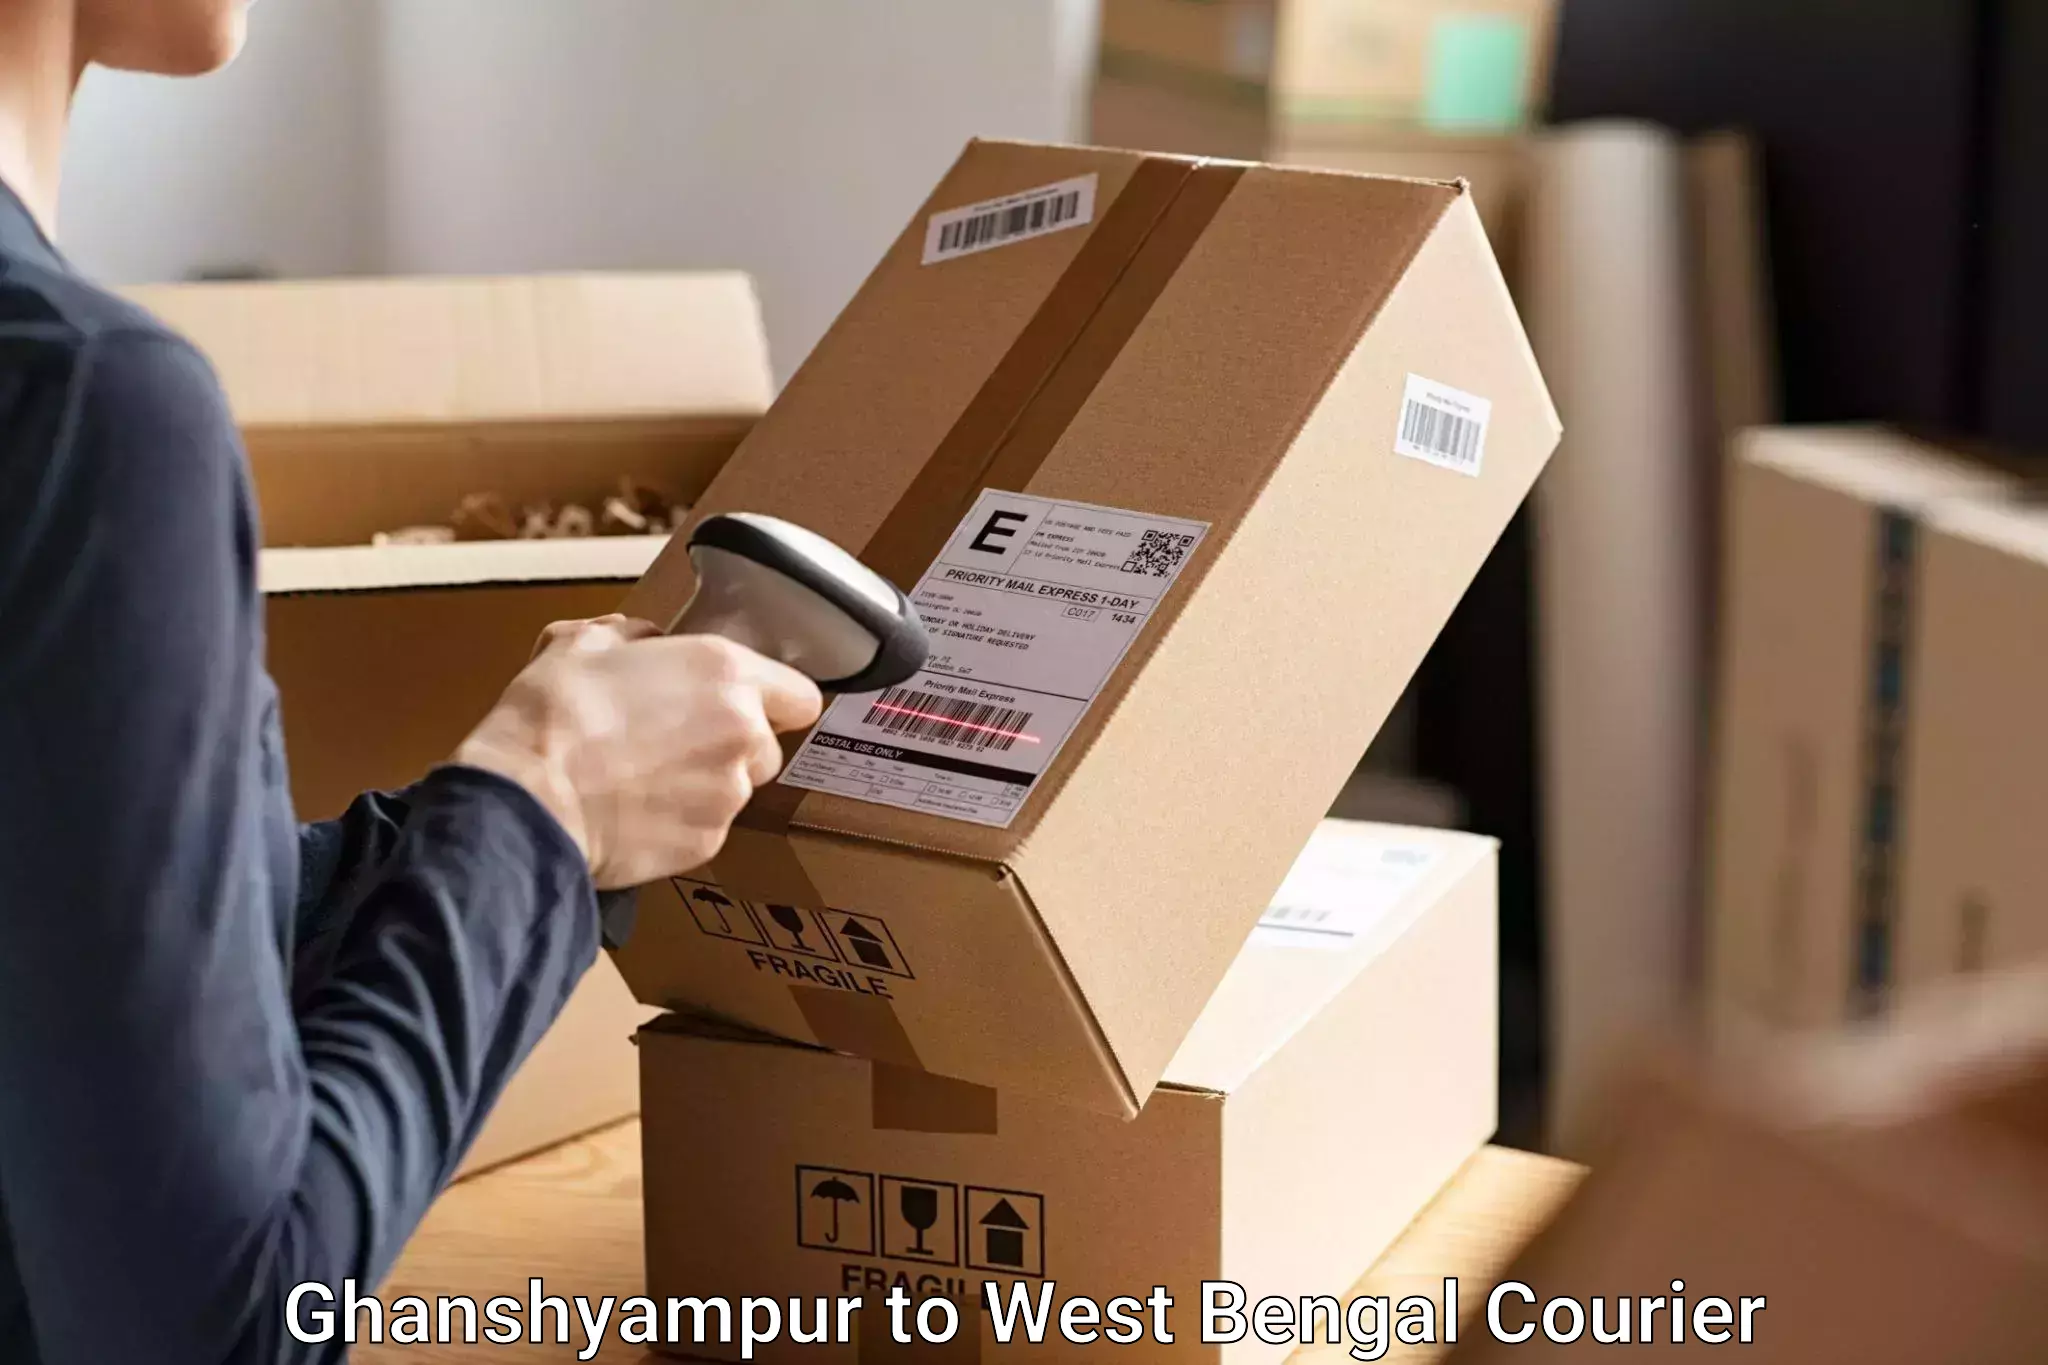 Luggage transport consultancy Ghanshyampur to West Bengal